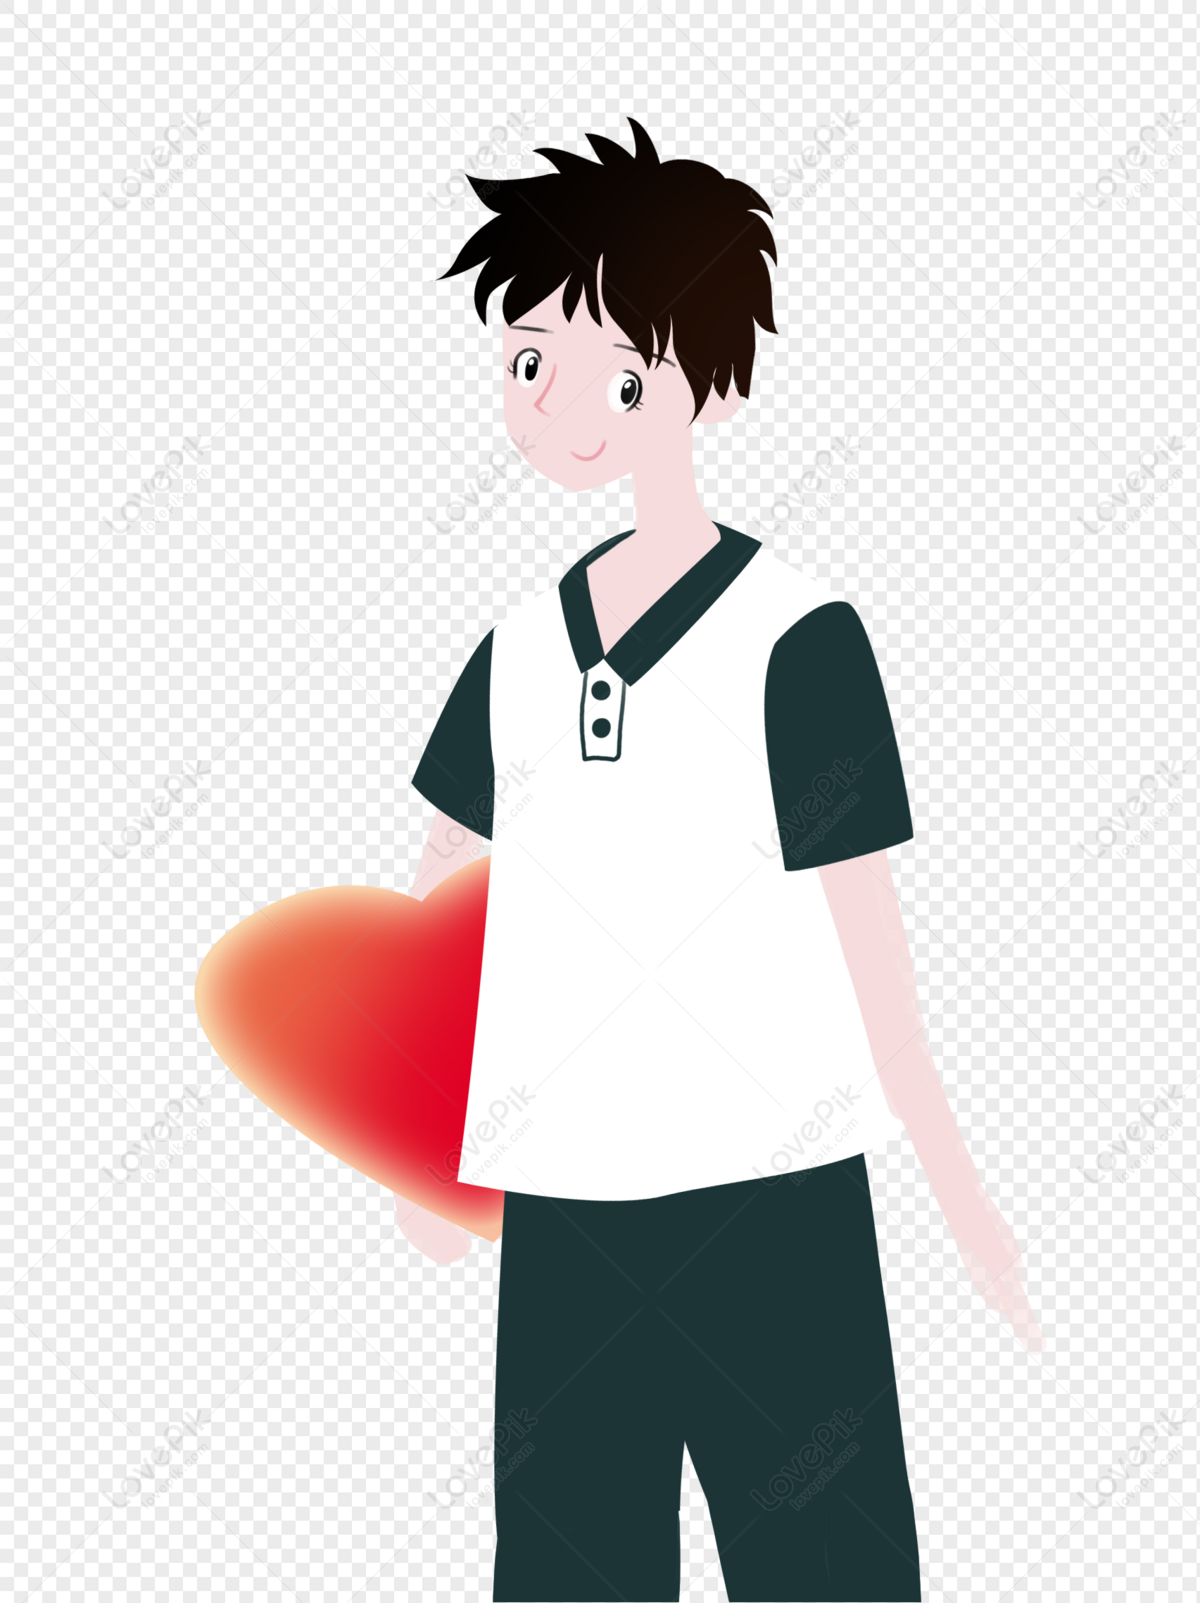 Cartoon Boy PNG Transparent Background And Clipart Image For Free Download  - Lovepik | 400352560